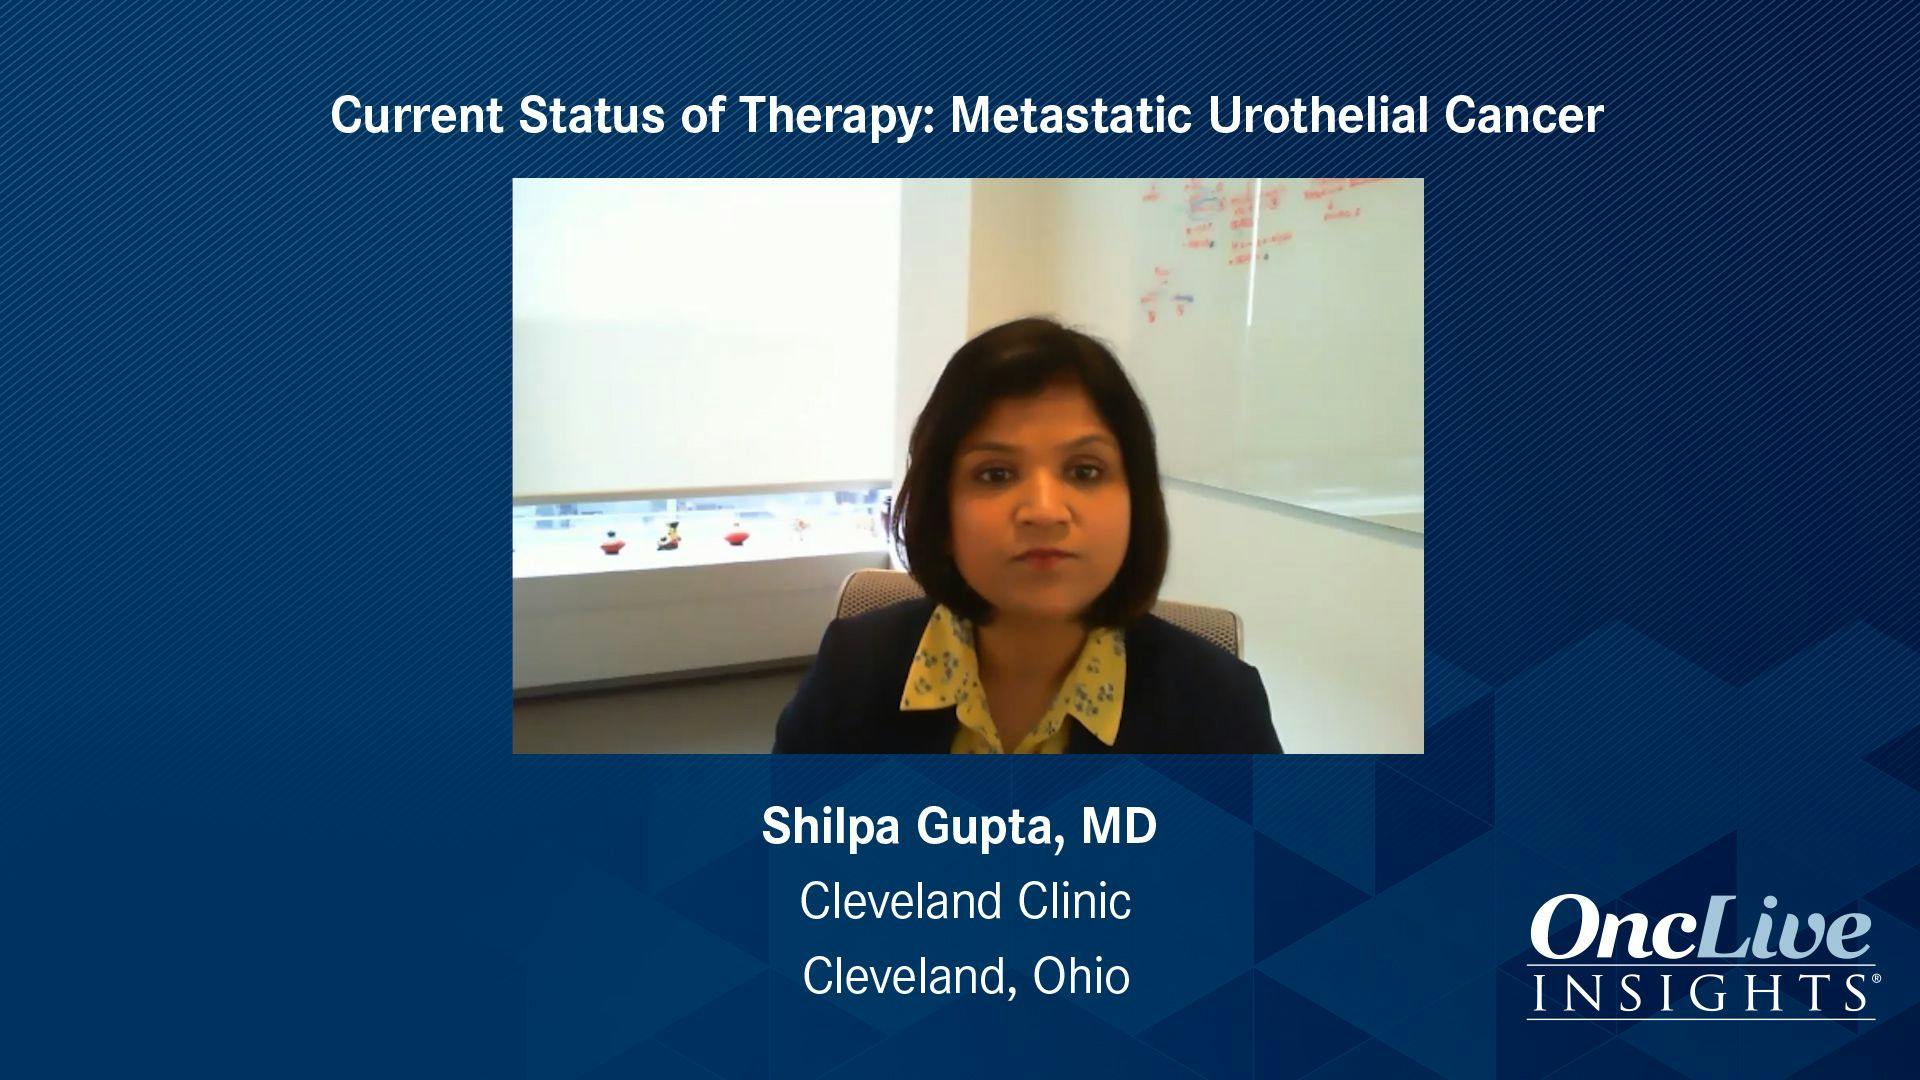 Improving Survival in Metastatic Urothelial Cancer